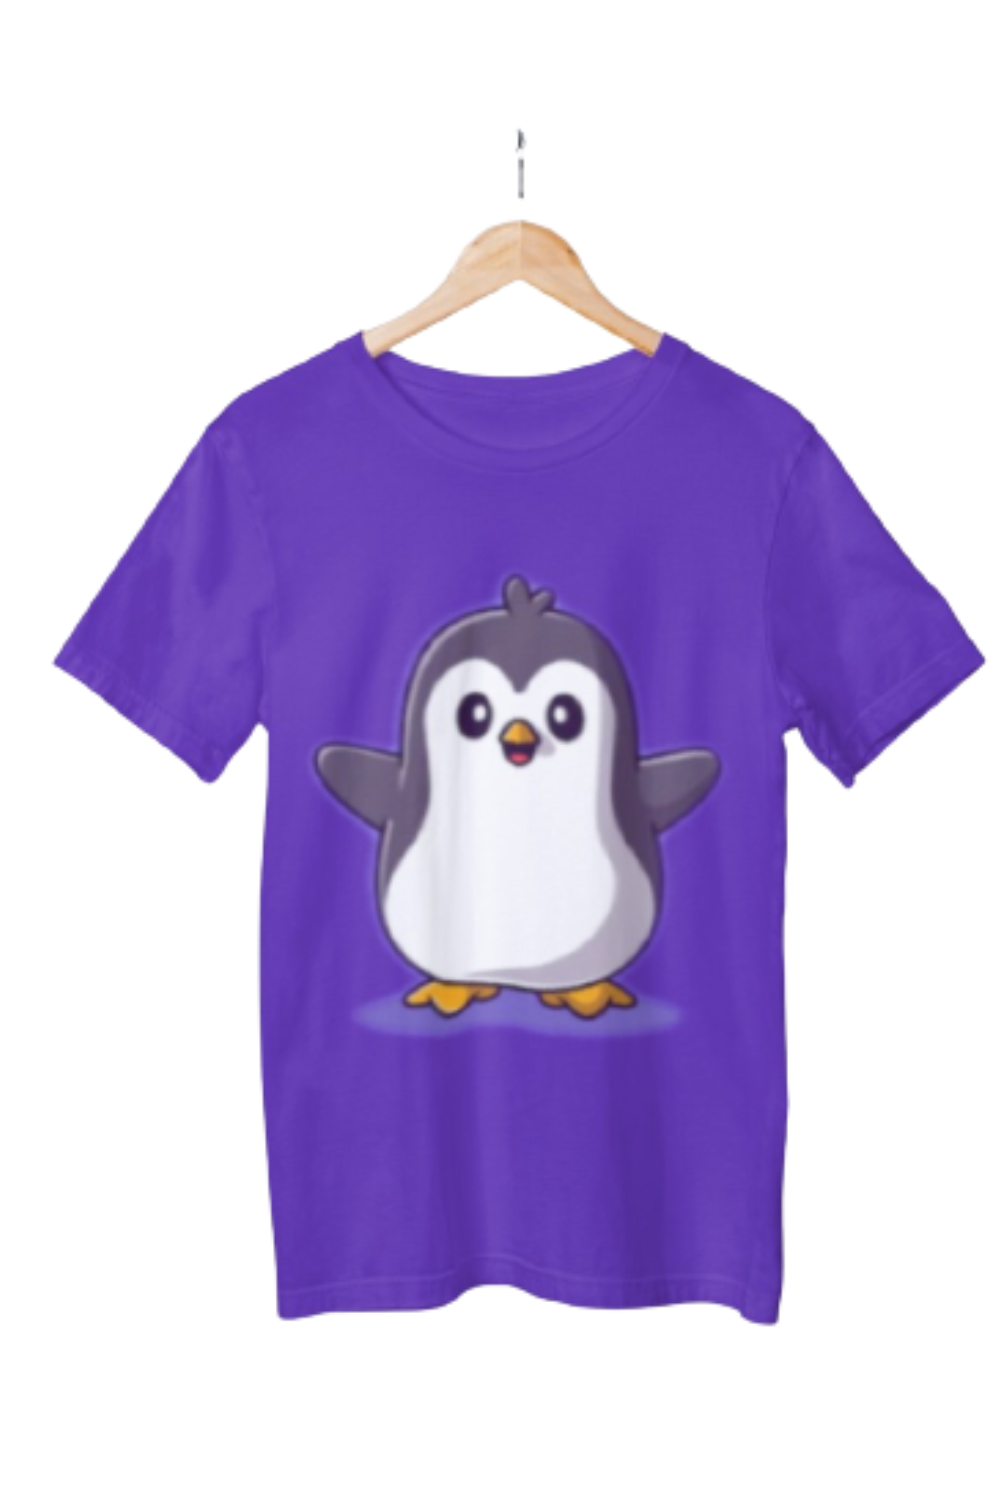 T-shirts for girls pinterest preview image.